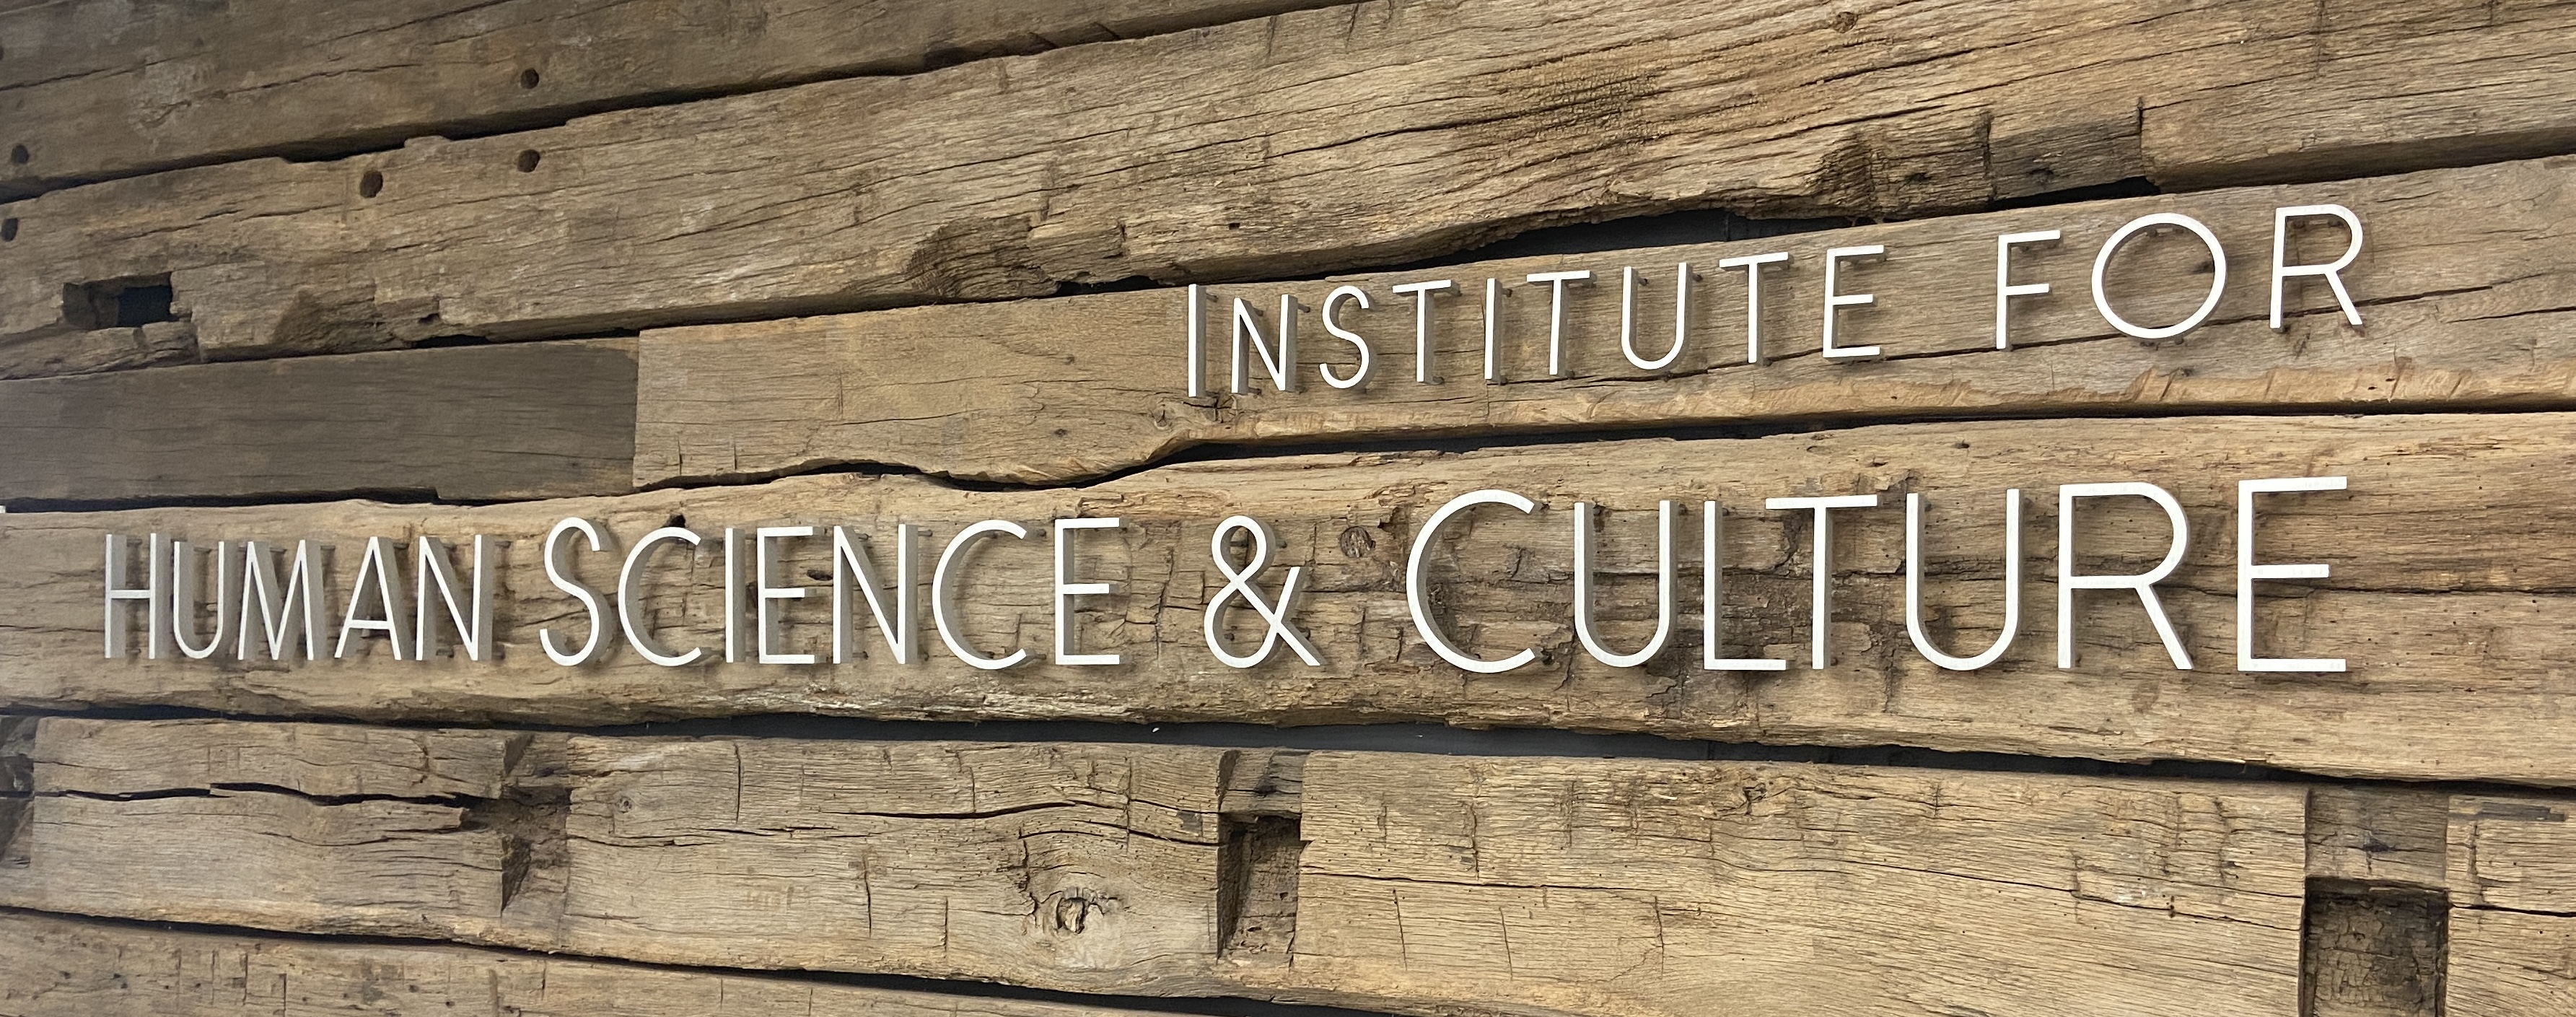 Institute for Human Science and Culture logo displayed on a wall